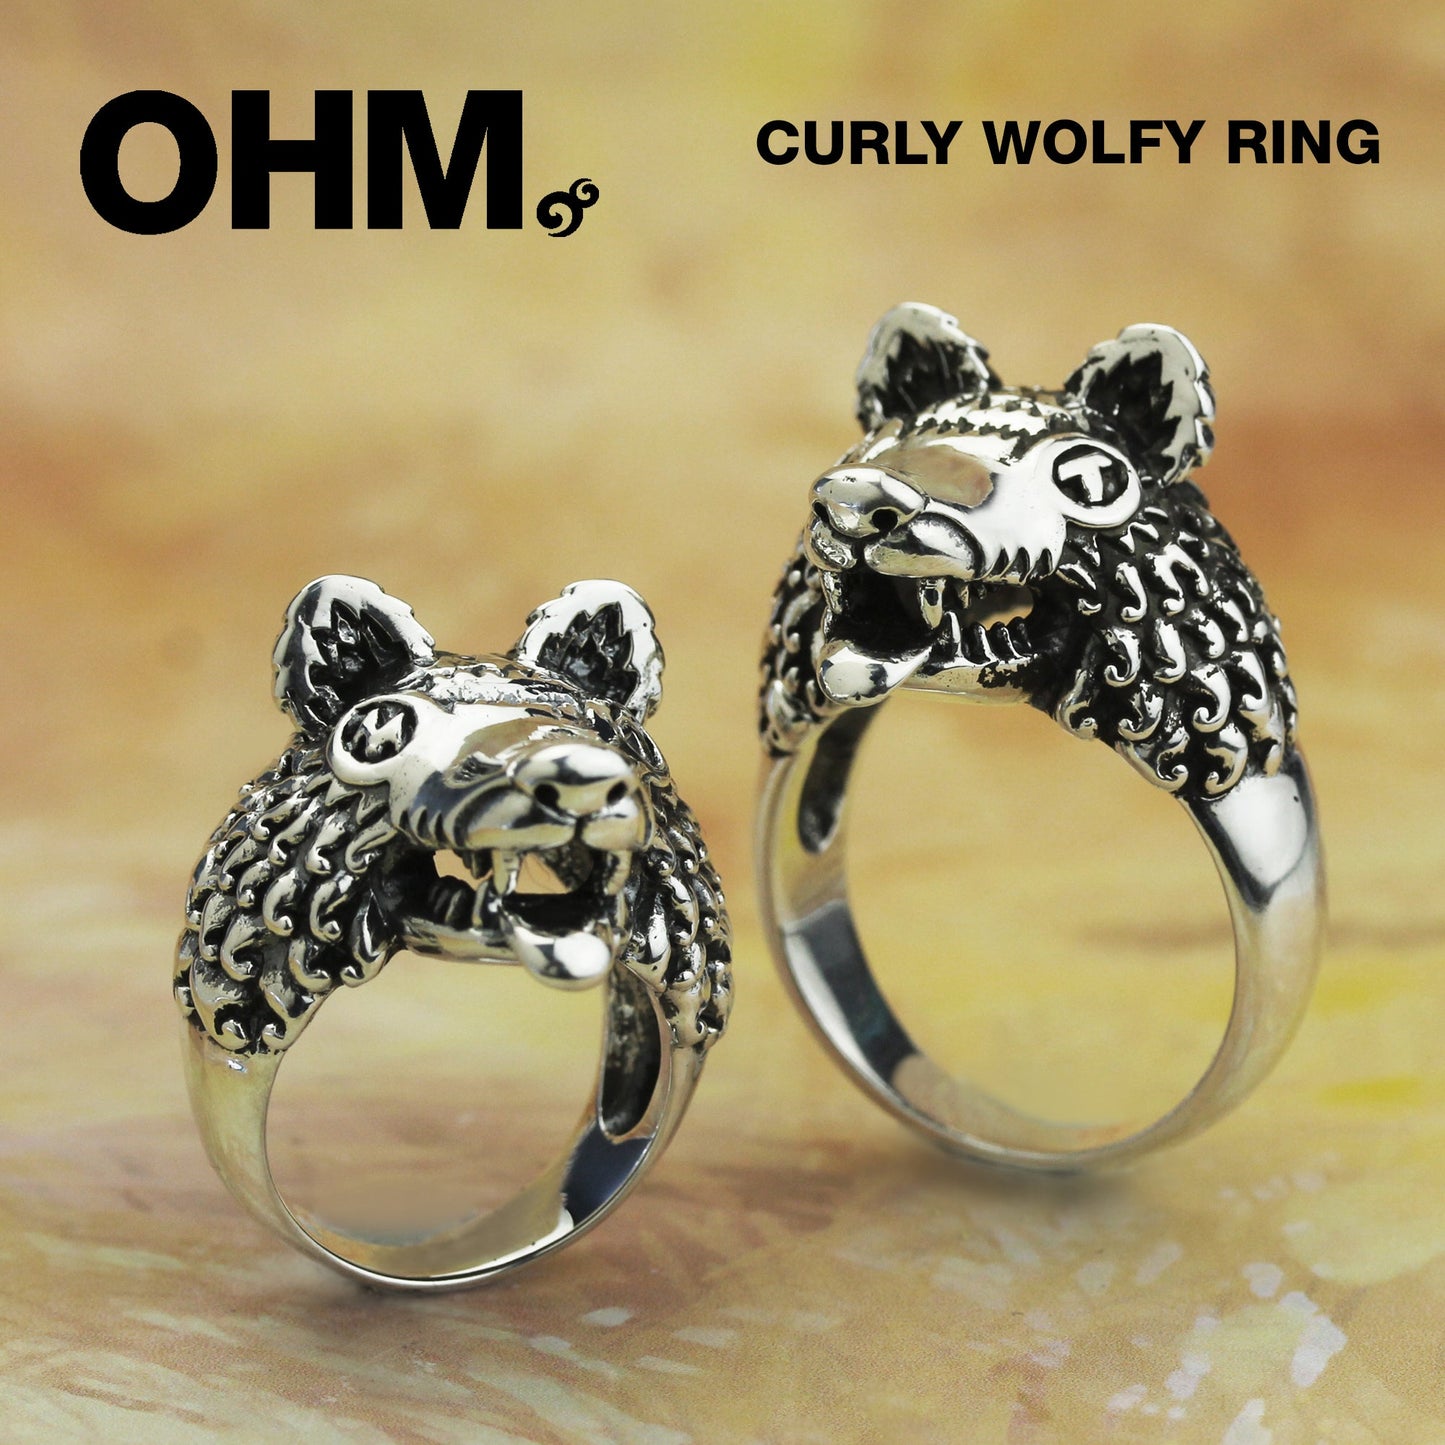 Curly Wolfy Ring